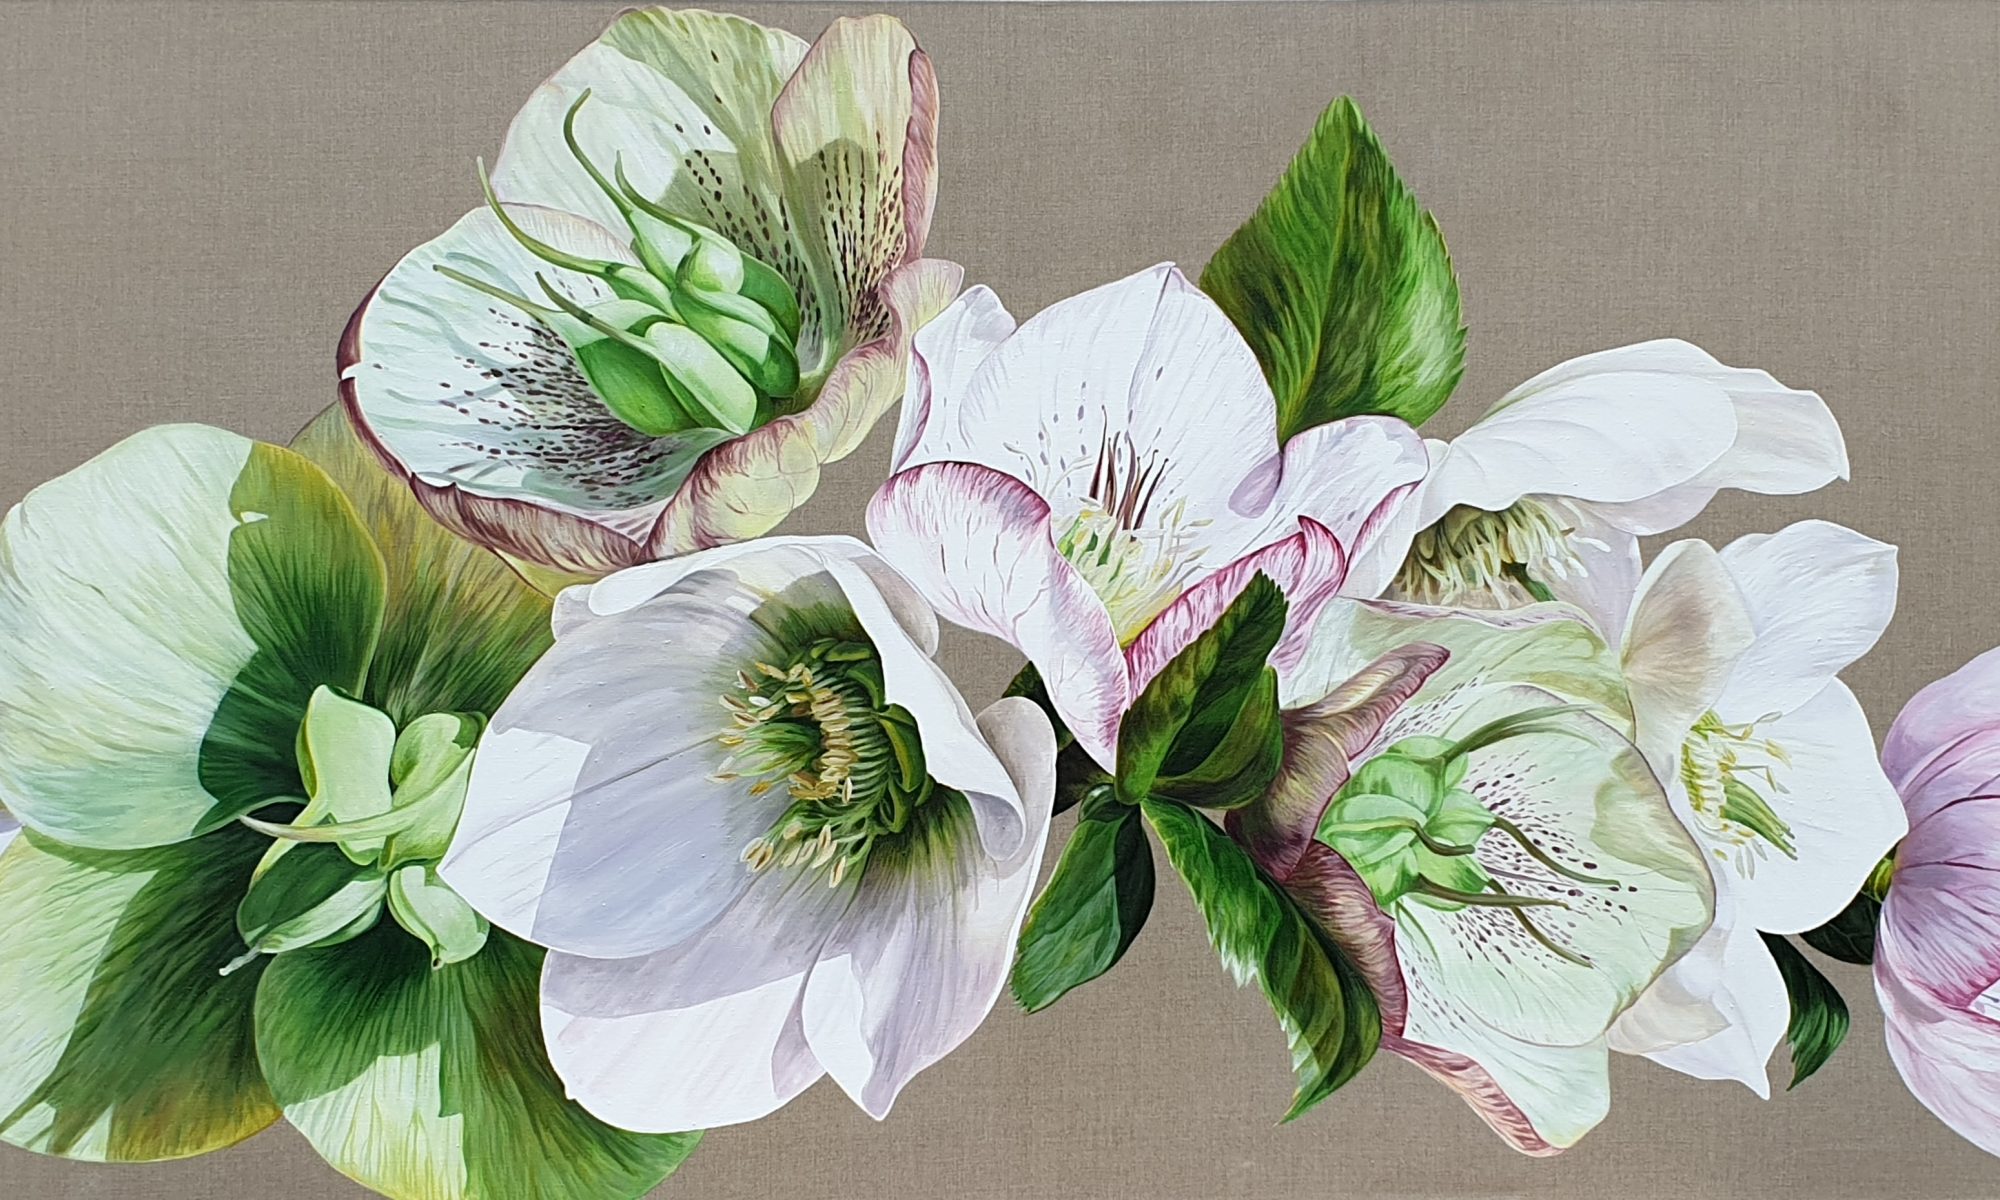 Original acrylic painting 'Hellebore Fresh' by Sarah Caswell.